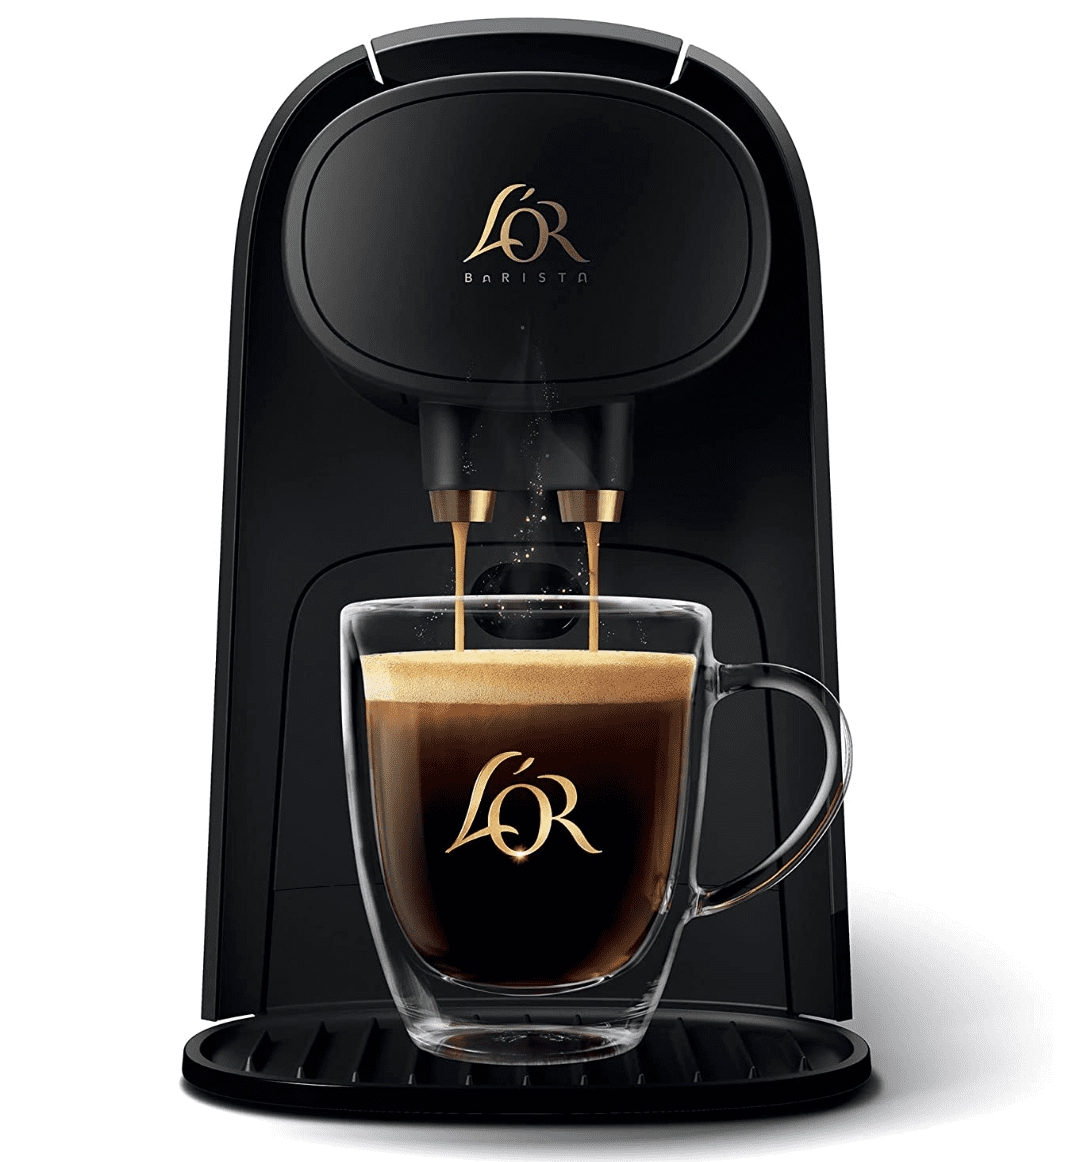 L'OR COFFEE MACHINE  Coffee lovers, we have a great offer: Free L